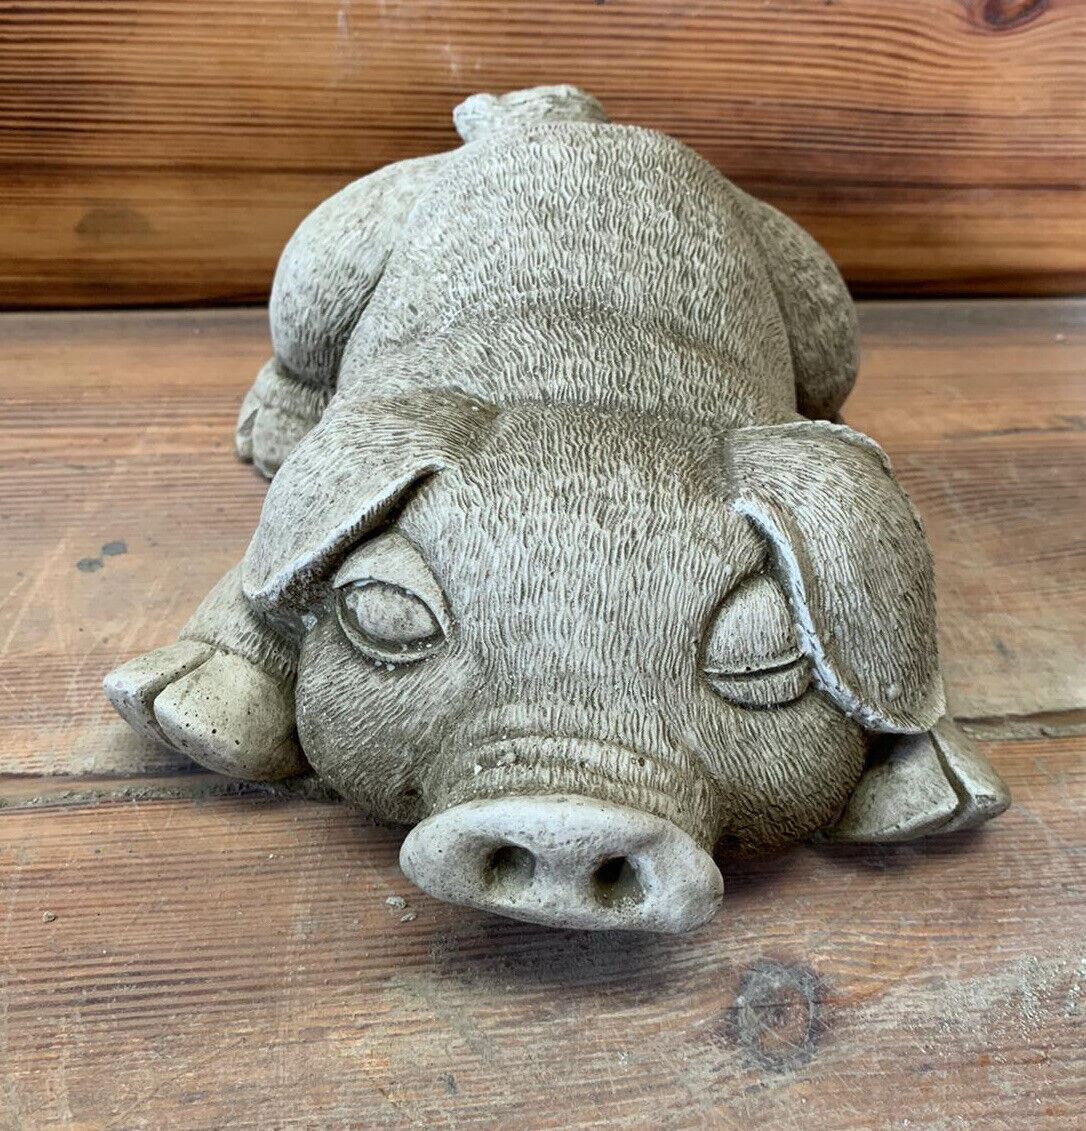 STONE GARDEN LAYING WINKING CHEEKY PIG DETAILED ORNAMENT STATUE